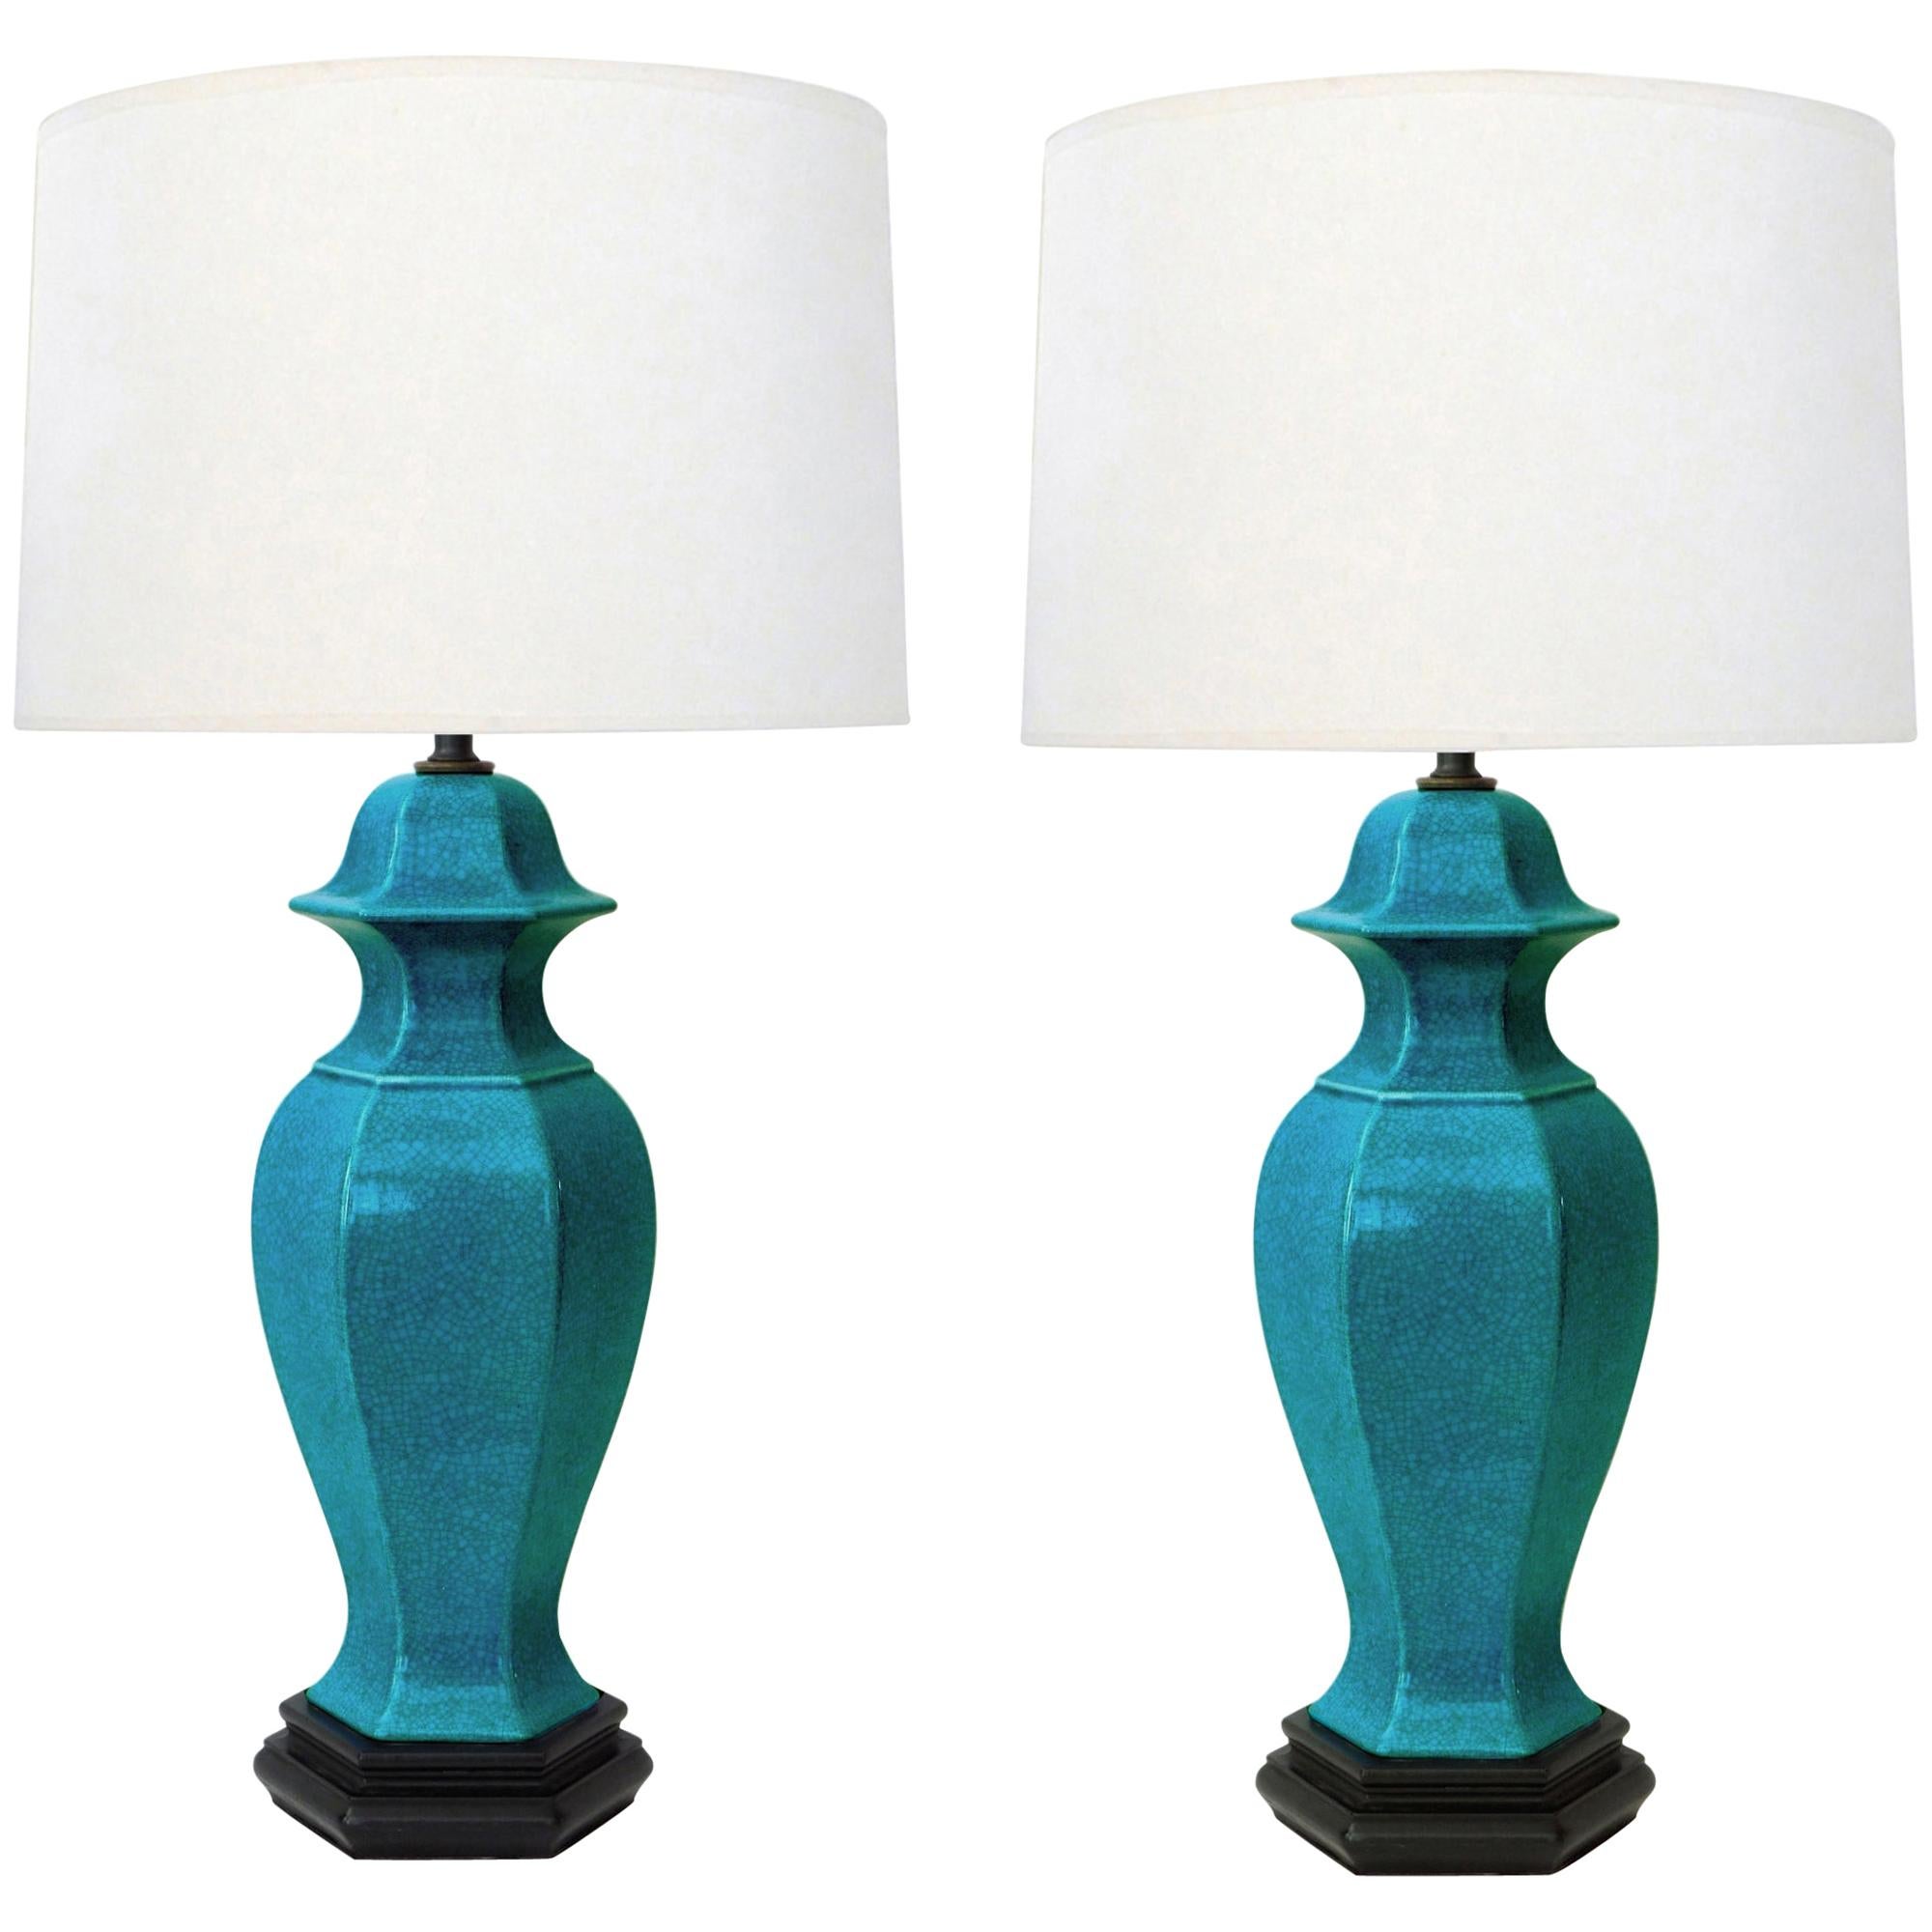 Pair of Asian-Inspired 1960s Teal Crackle-Glazed Ginger Jar Lamps For Sale